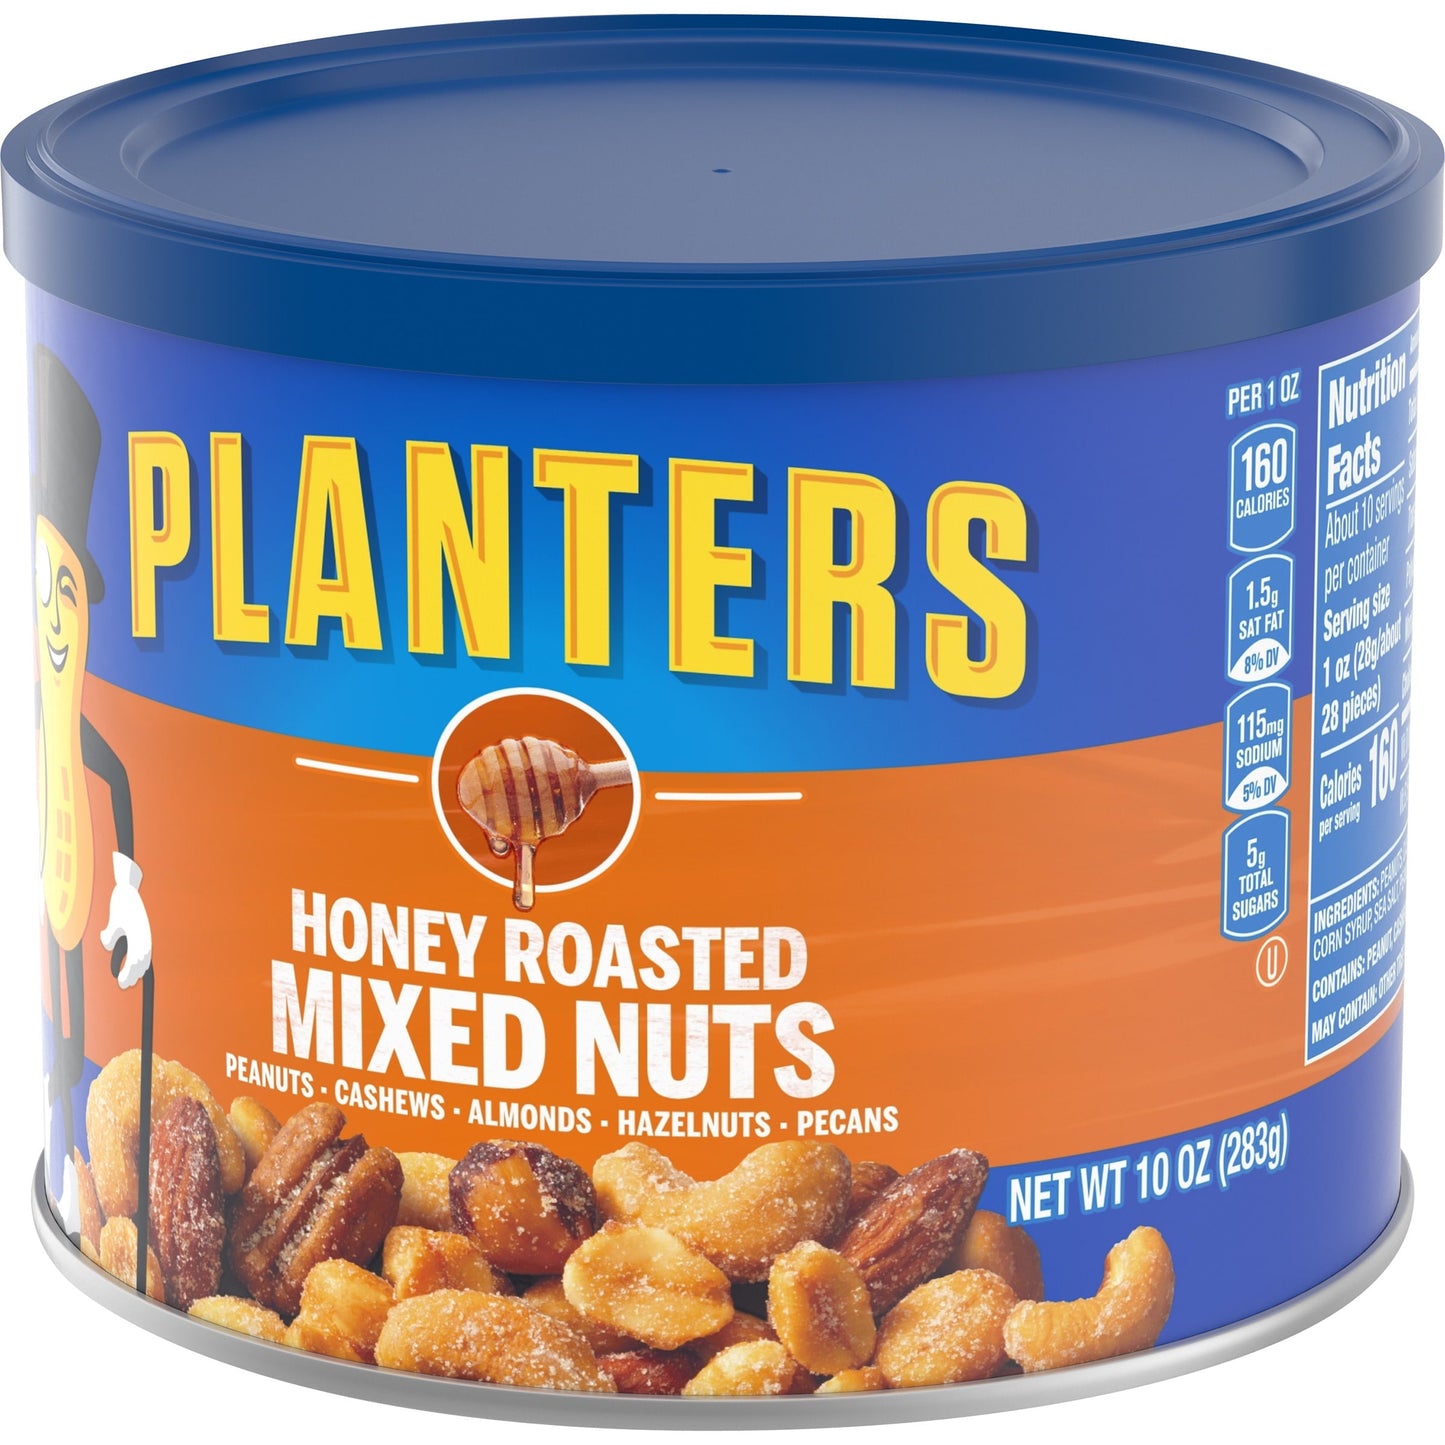 Planters Honey Roasted Mixed Nuts with Peanuts, Cashews, Almonds, Hazelnuts & Pecans, 10 oz Canister